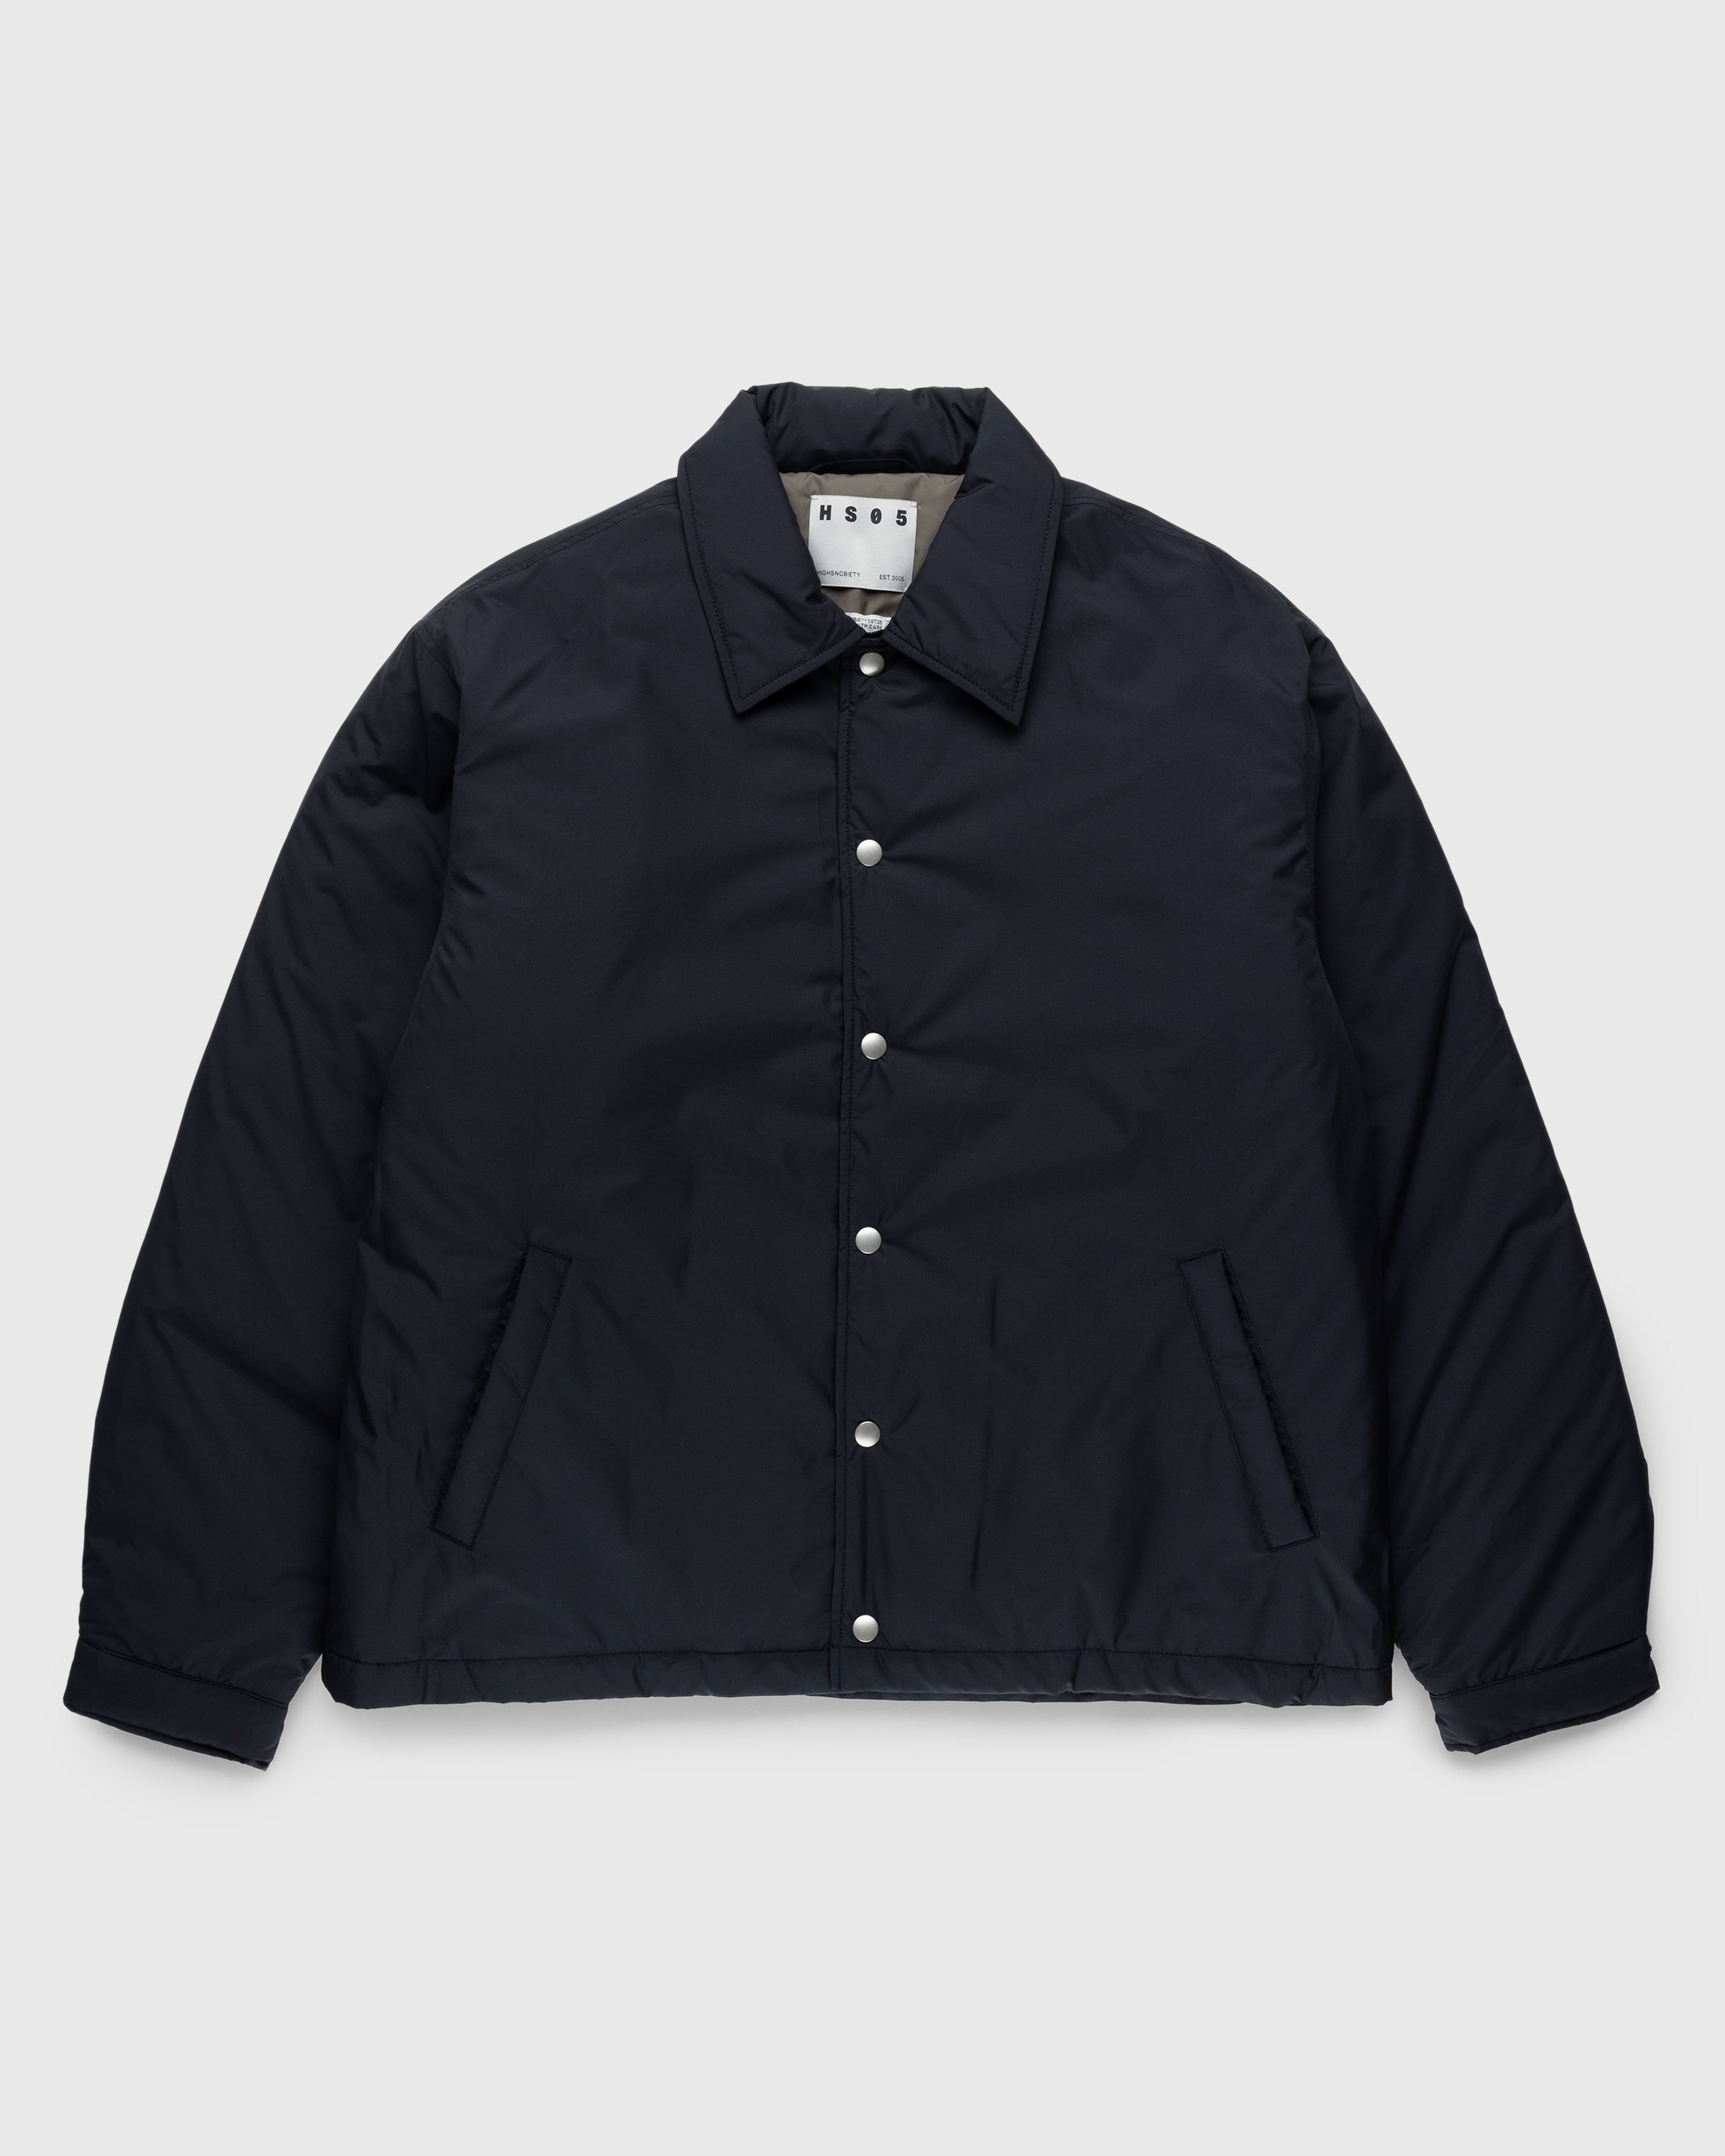 Highsnobiety HS05 – Light Insulated Eco-Poly Jacket Black - Outerwear - Black - Image 1